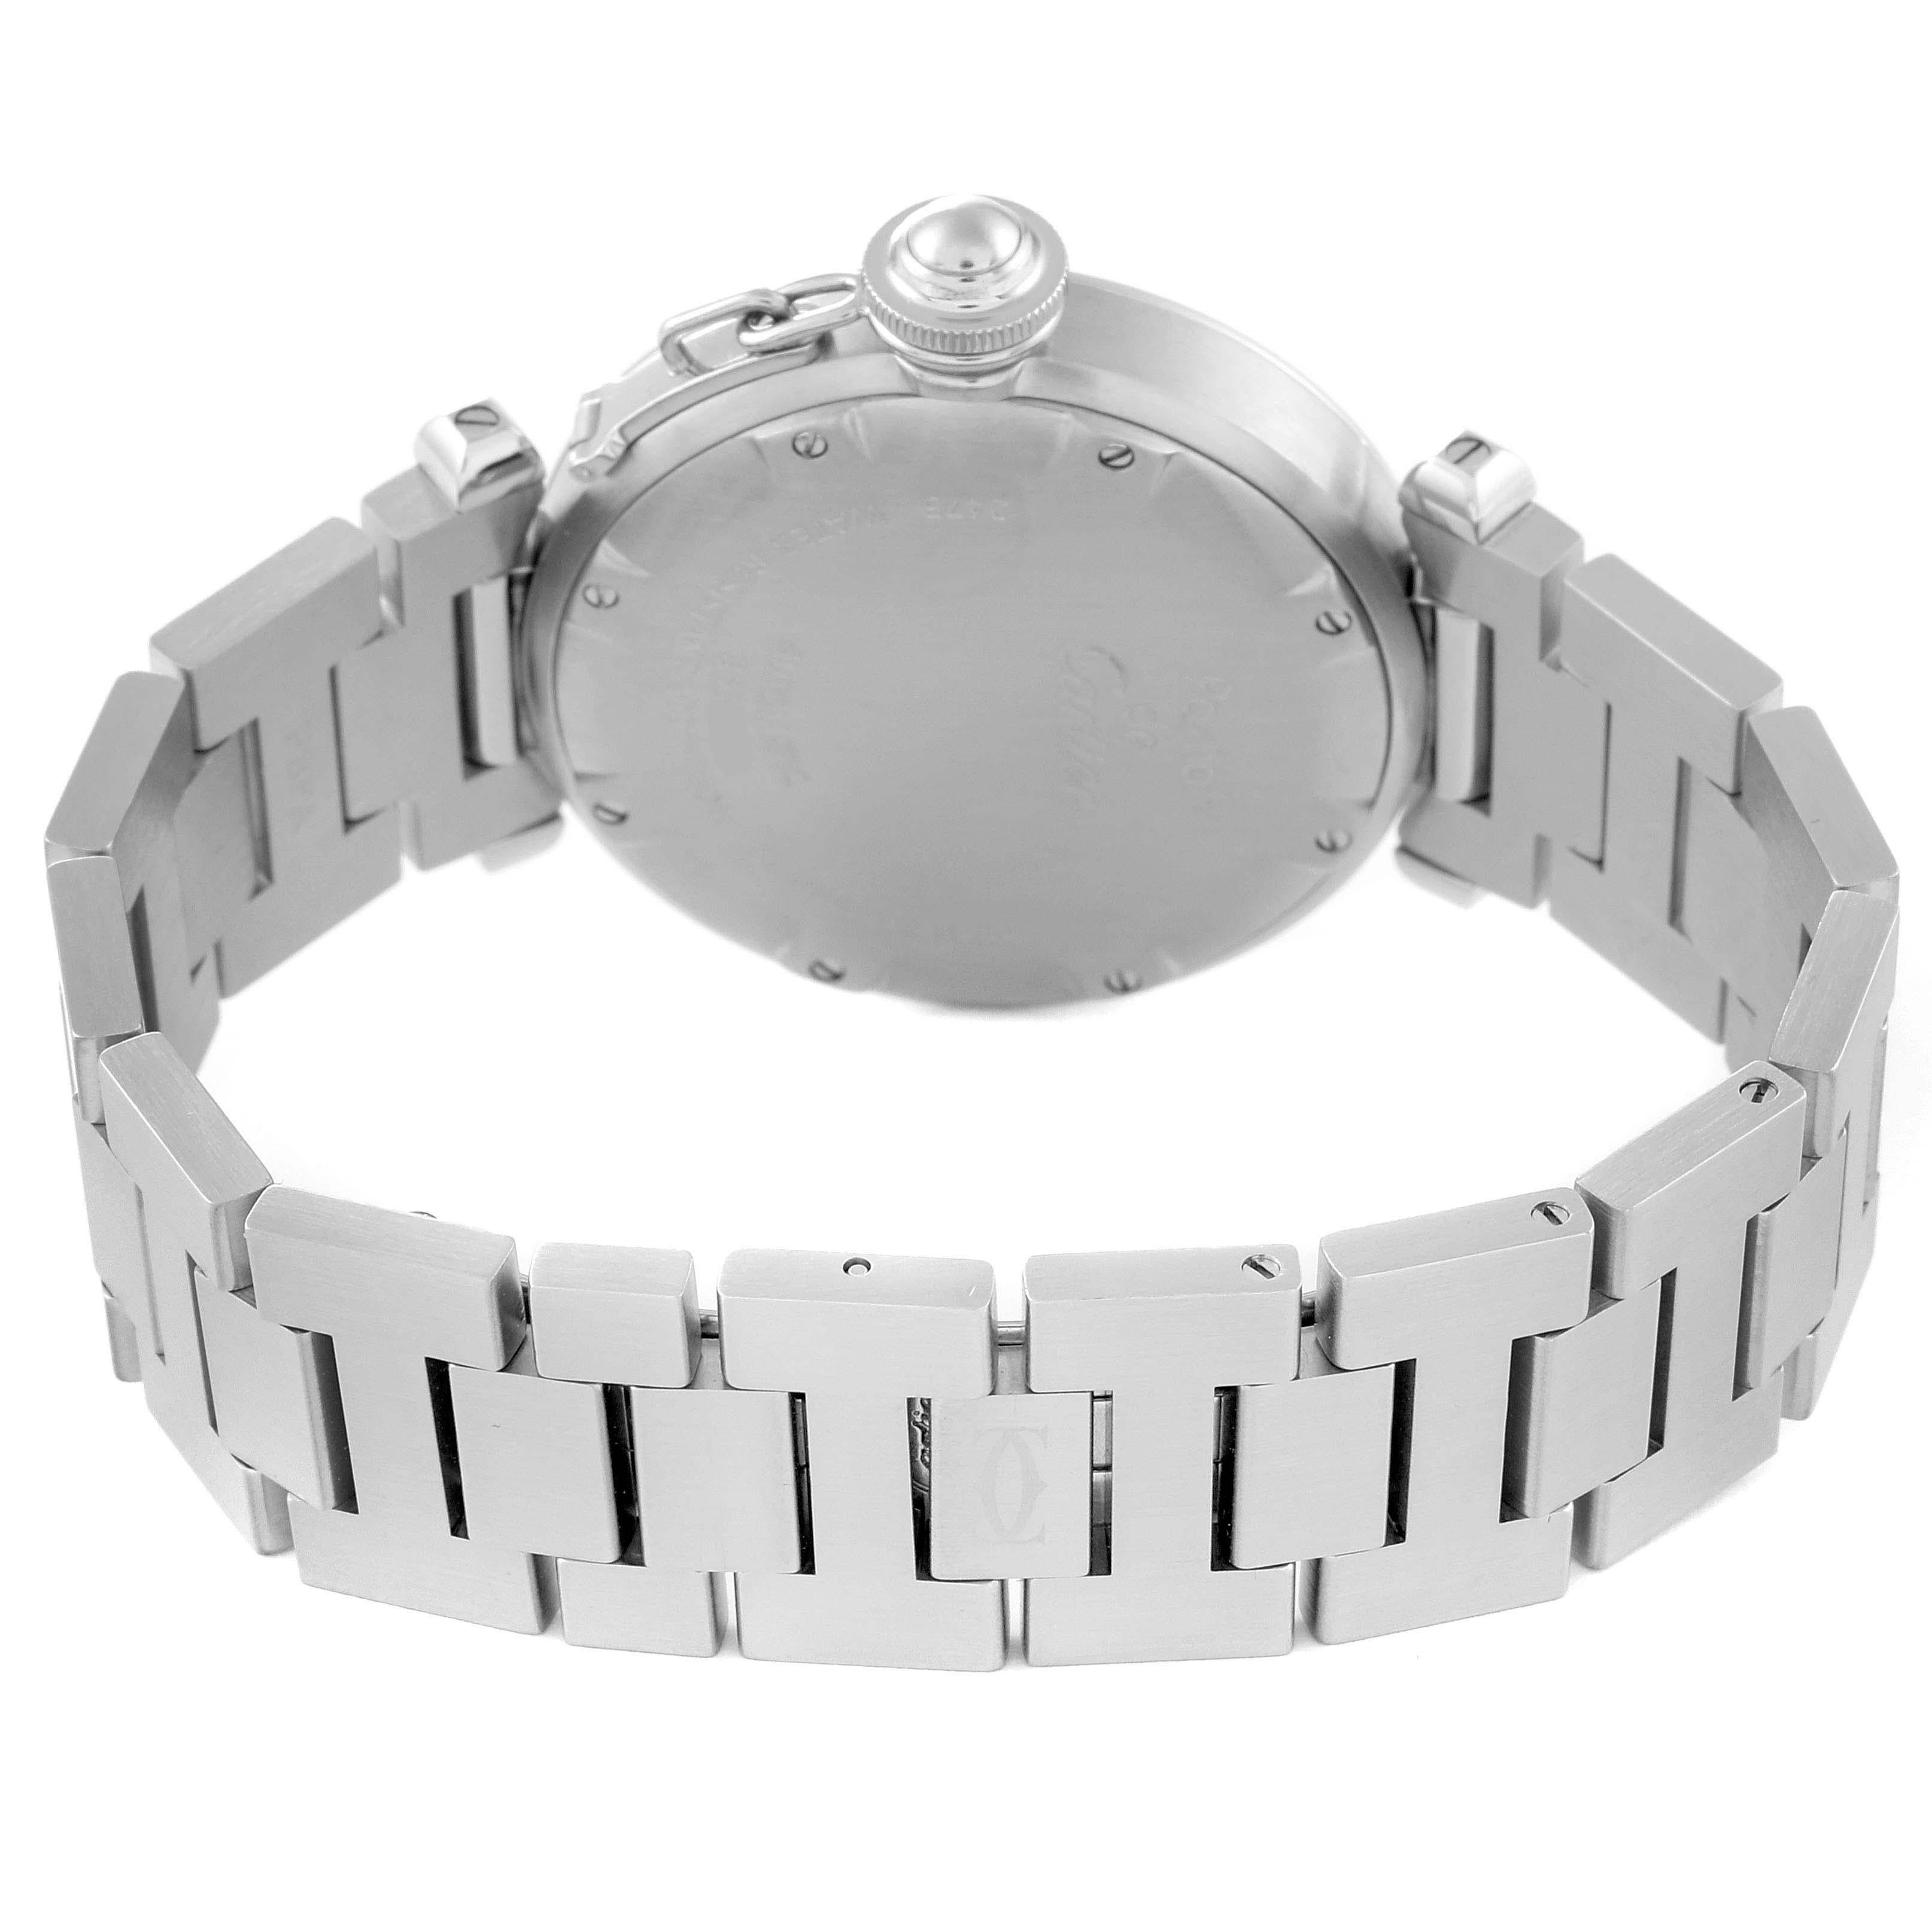 Cartier Pasha C Midsize Big Date White Dial Steel Mens Watch W31044M7 For Sale 3